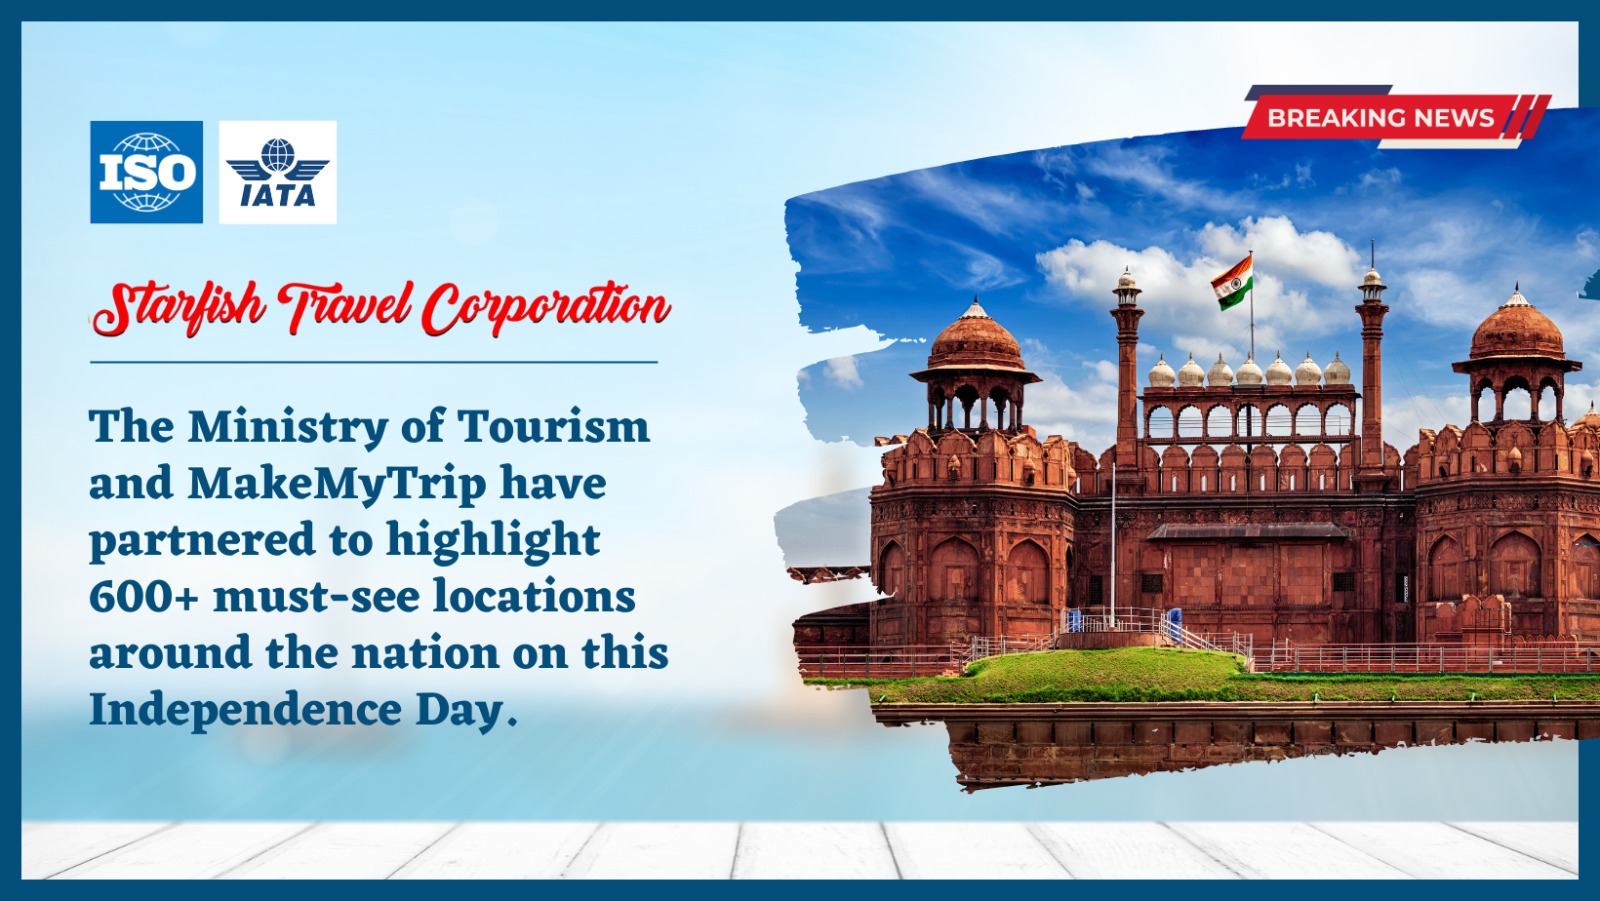 You are currently viewing The Ministry of Tourism and MakeMyTrip have partnered to highlight 600+ must-see locations around the nation on this Independence Day.